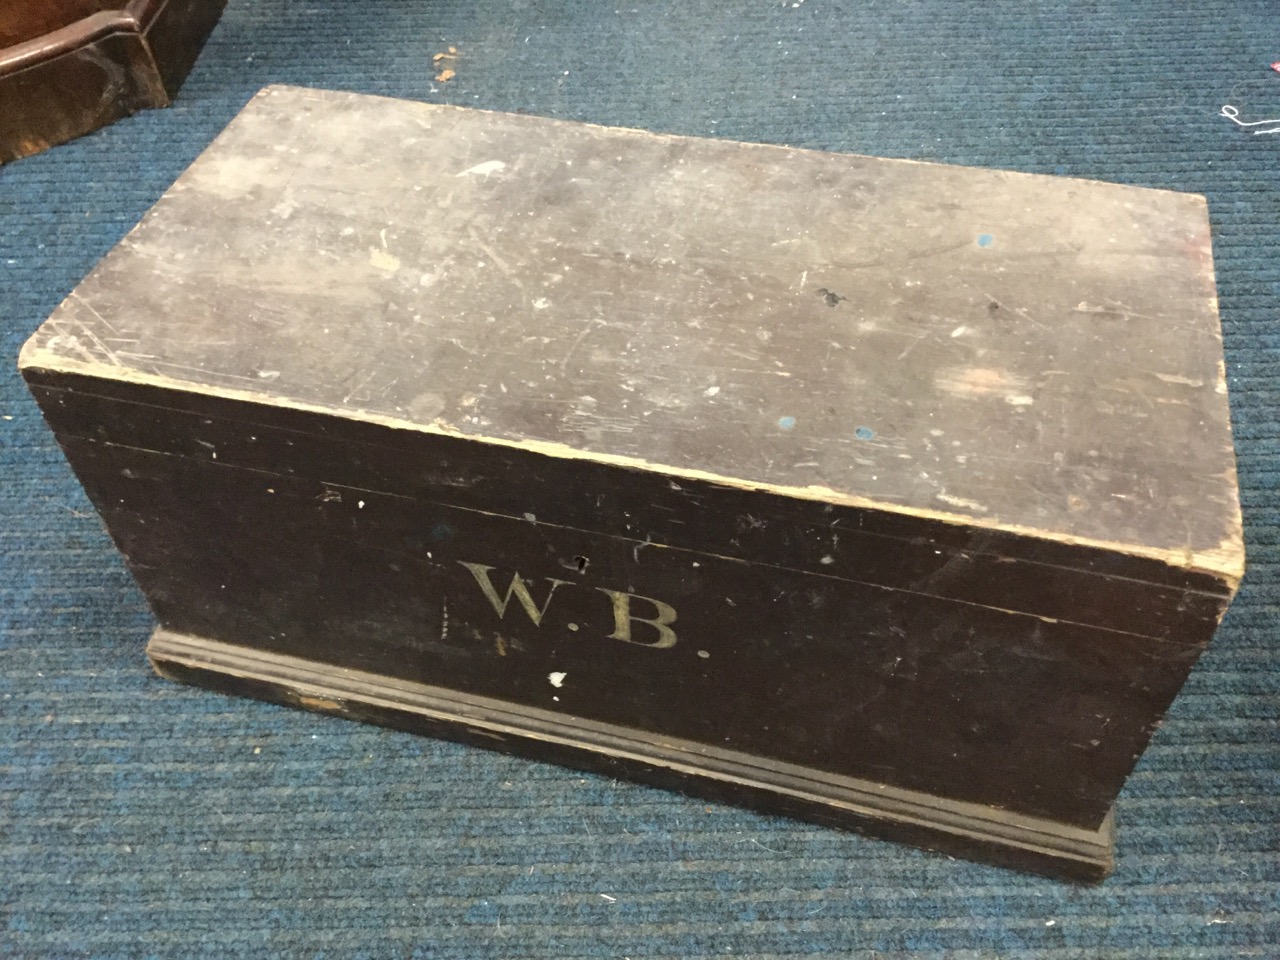 A lead workers pine toolbox of dovetailed construction on moulded plinth, containing interior tray